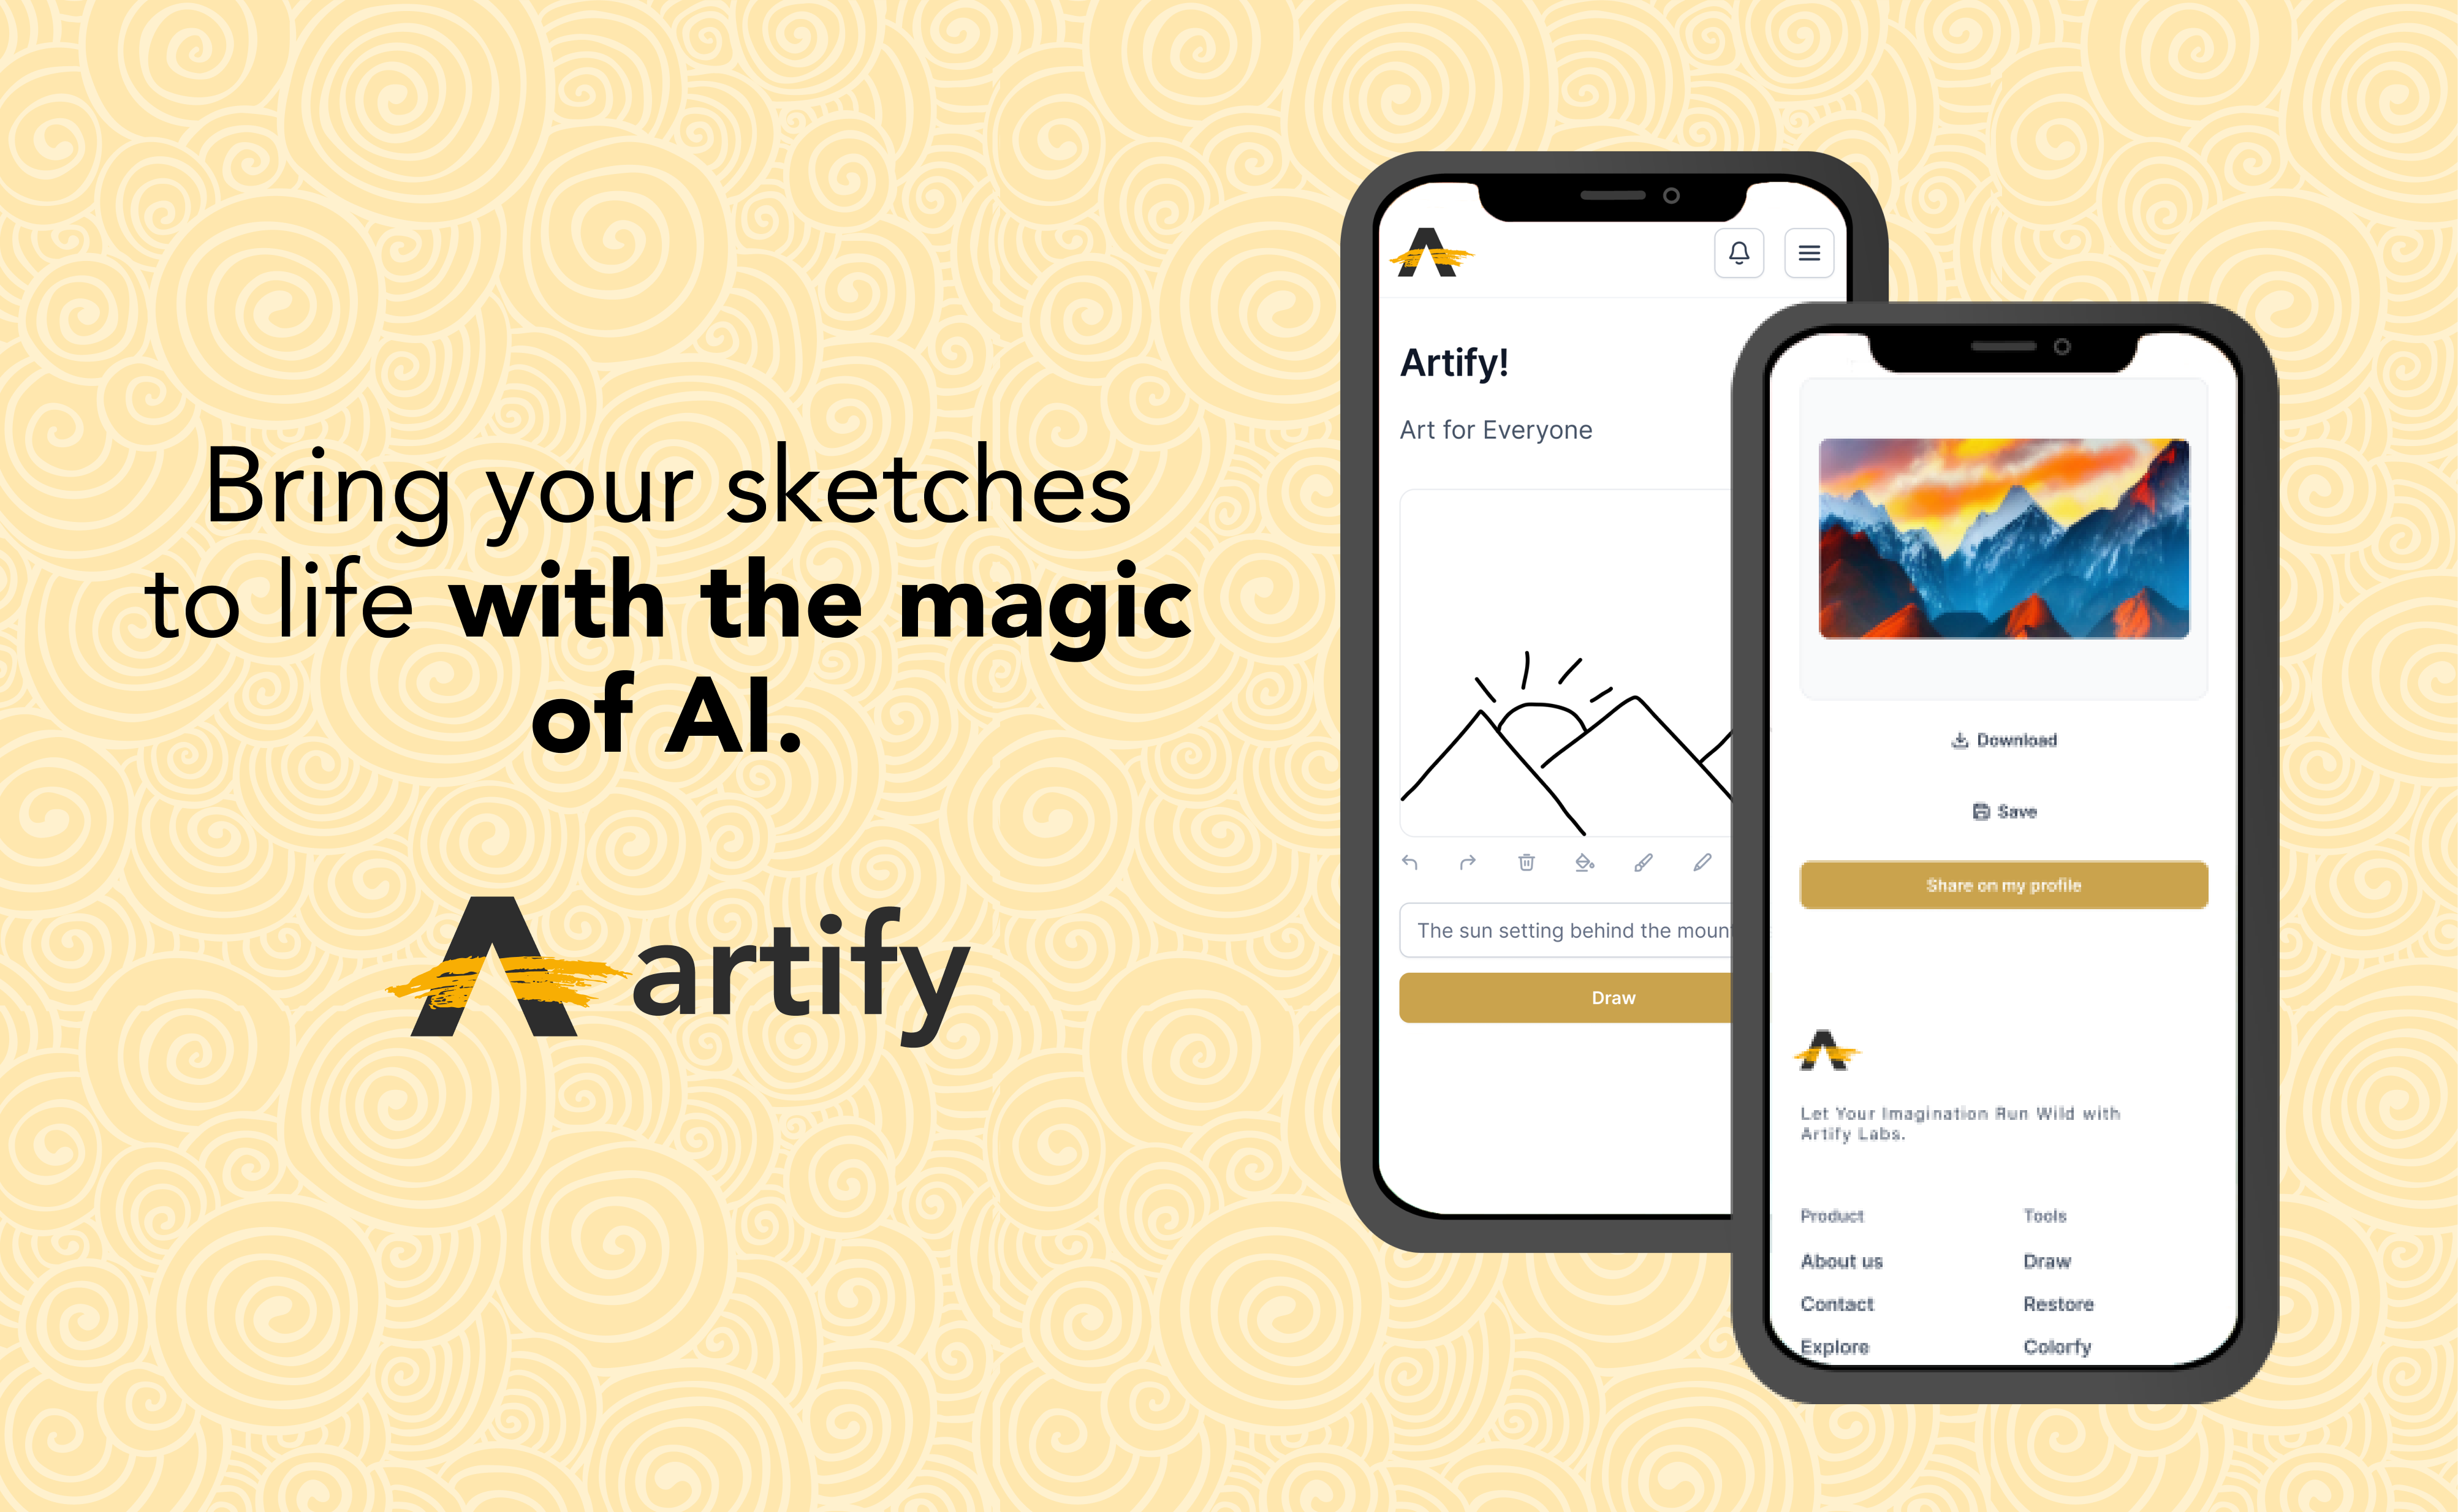 Artify - A Suite of Awesome AI Art Tools